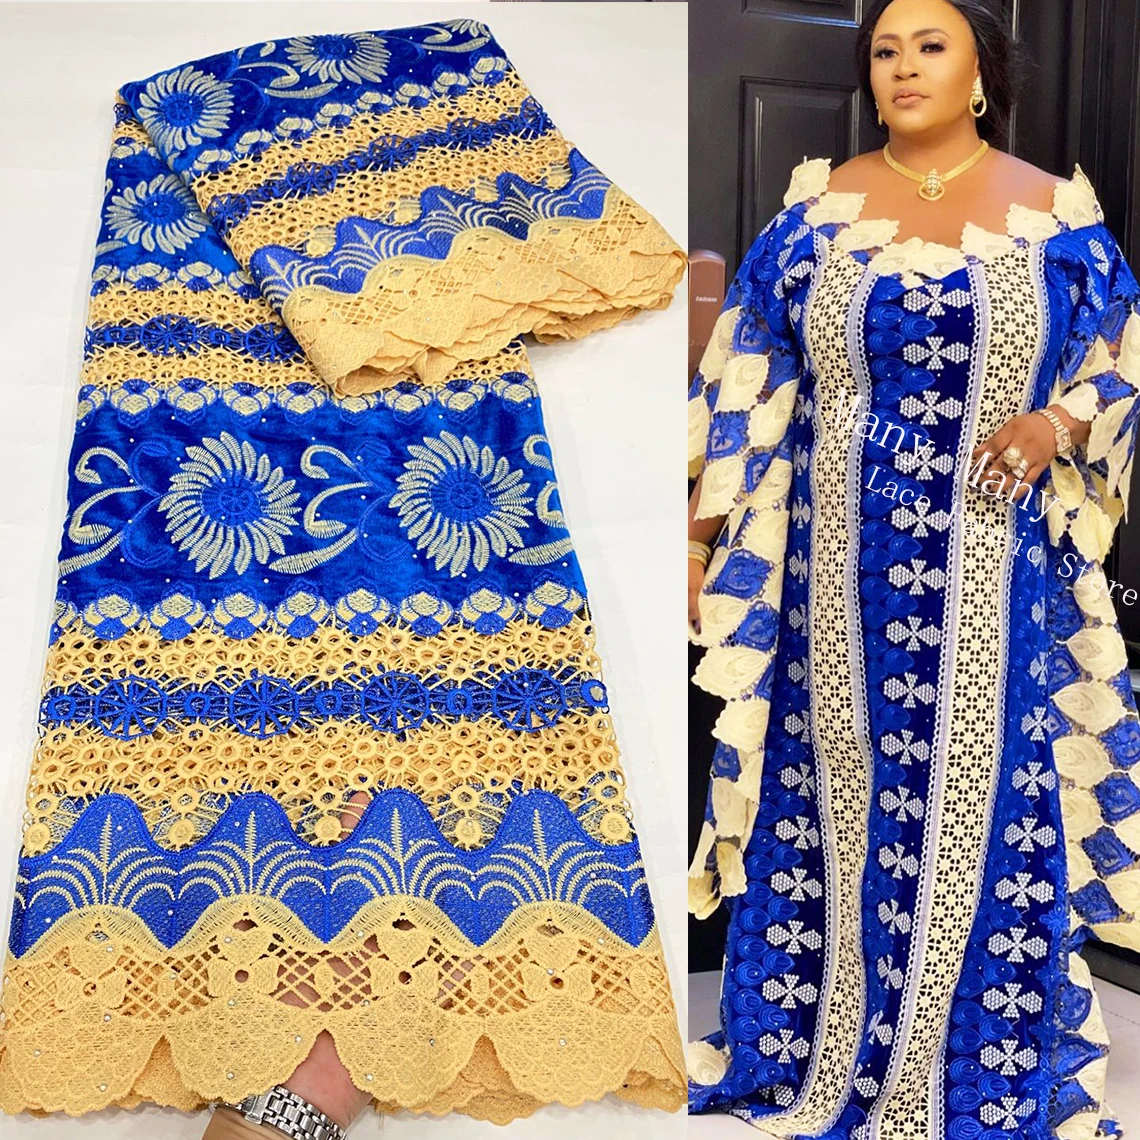 Royal Blue African Velvet Lace With Stones 2021 High Quality Cotton Cord Fabrics Dry Lace Ankara Wedding Bride Party Material